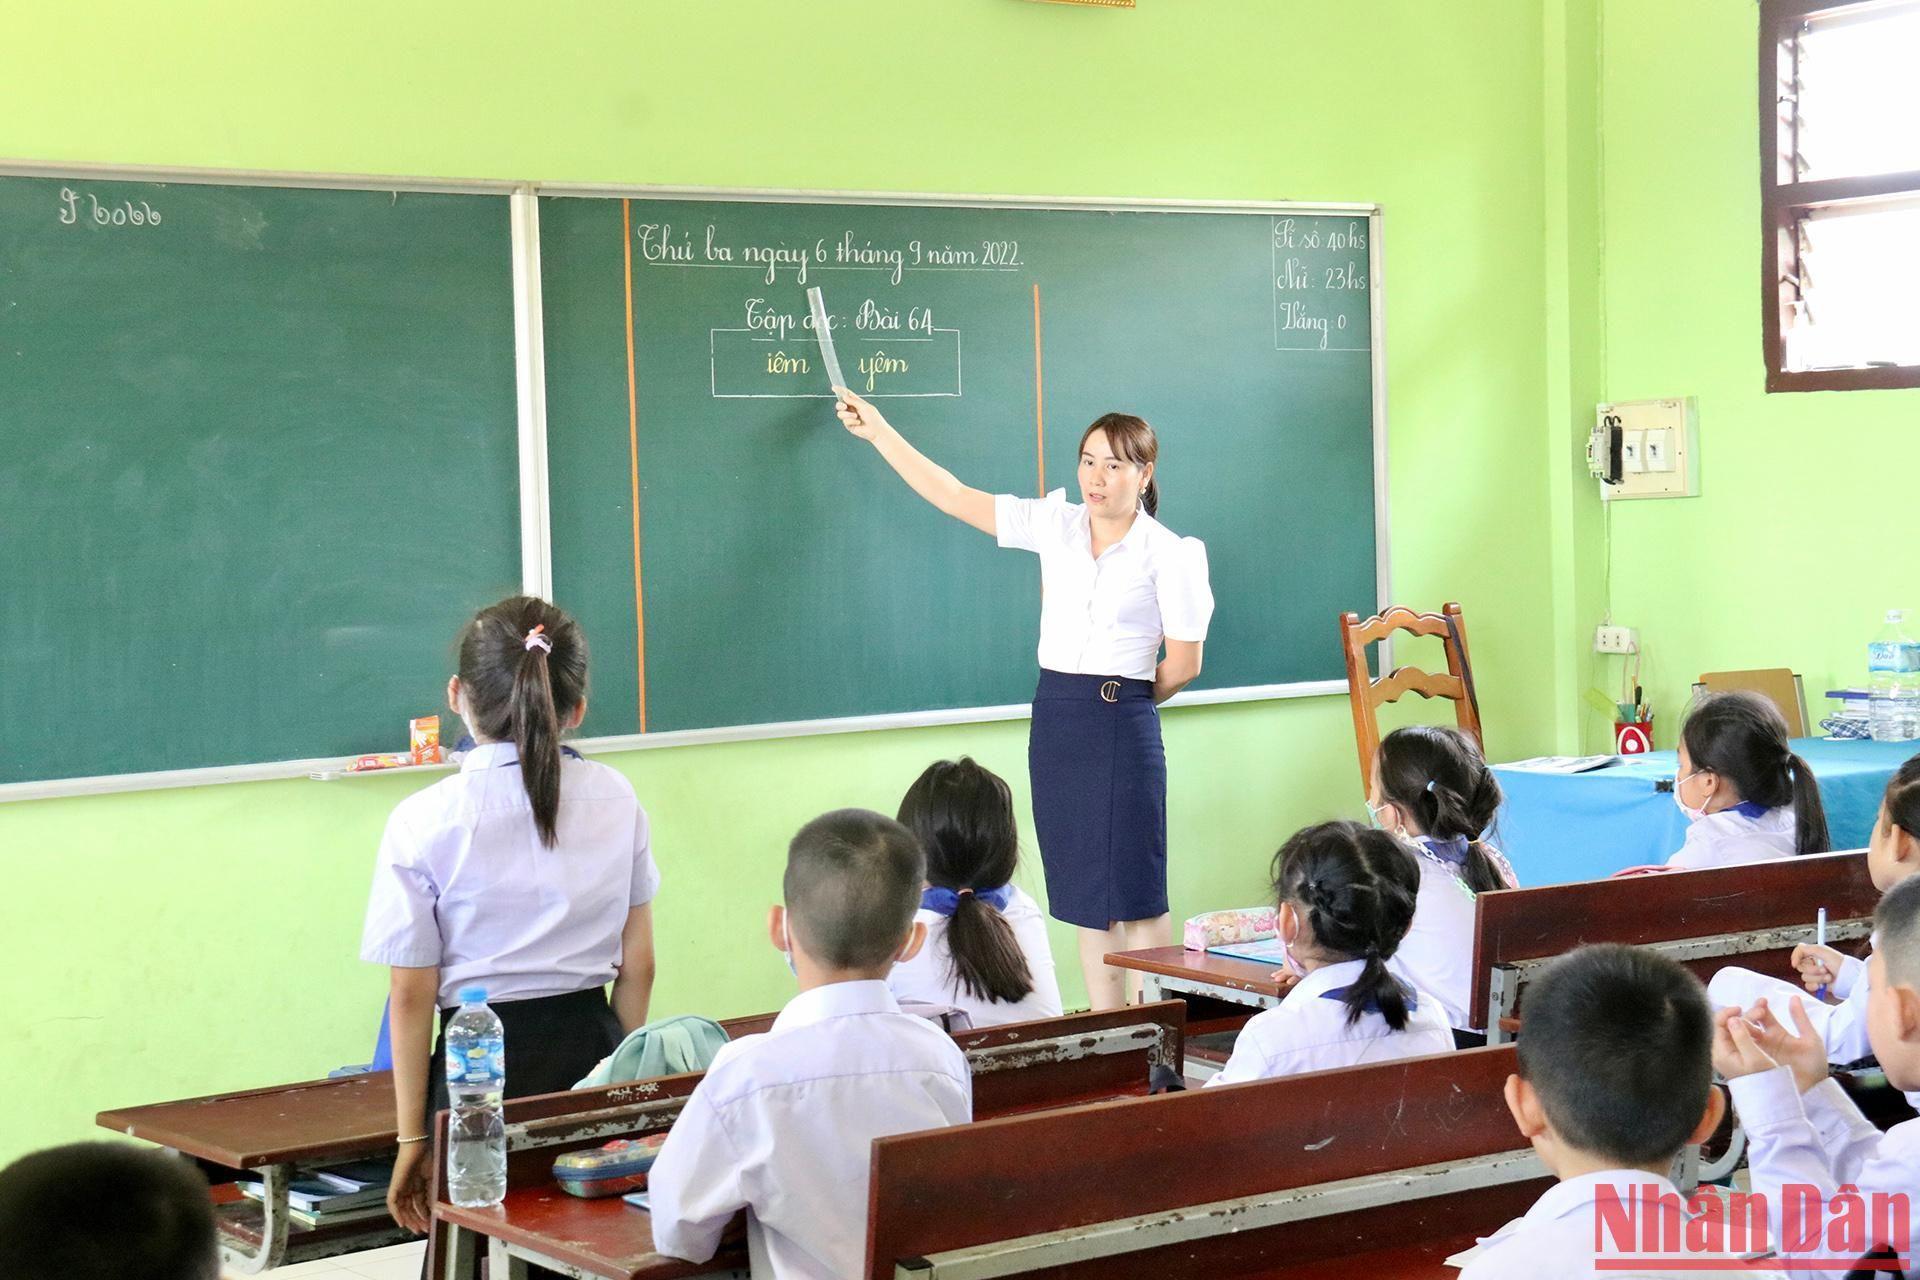 Nguyen Du Lao-Vietnamese bilingual language school has a spacious campus with an area of more than 1 hectare. The school has two spacious 3-storey main building blocks arranged into 30 classrooms for more than 1,000 students.